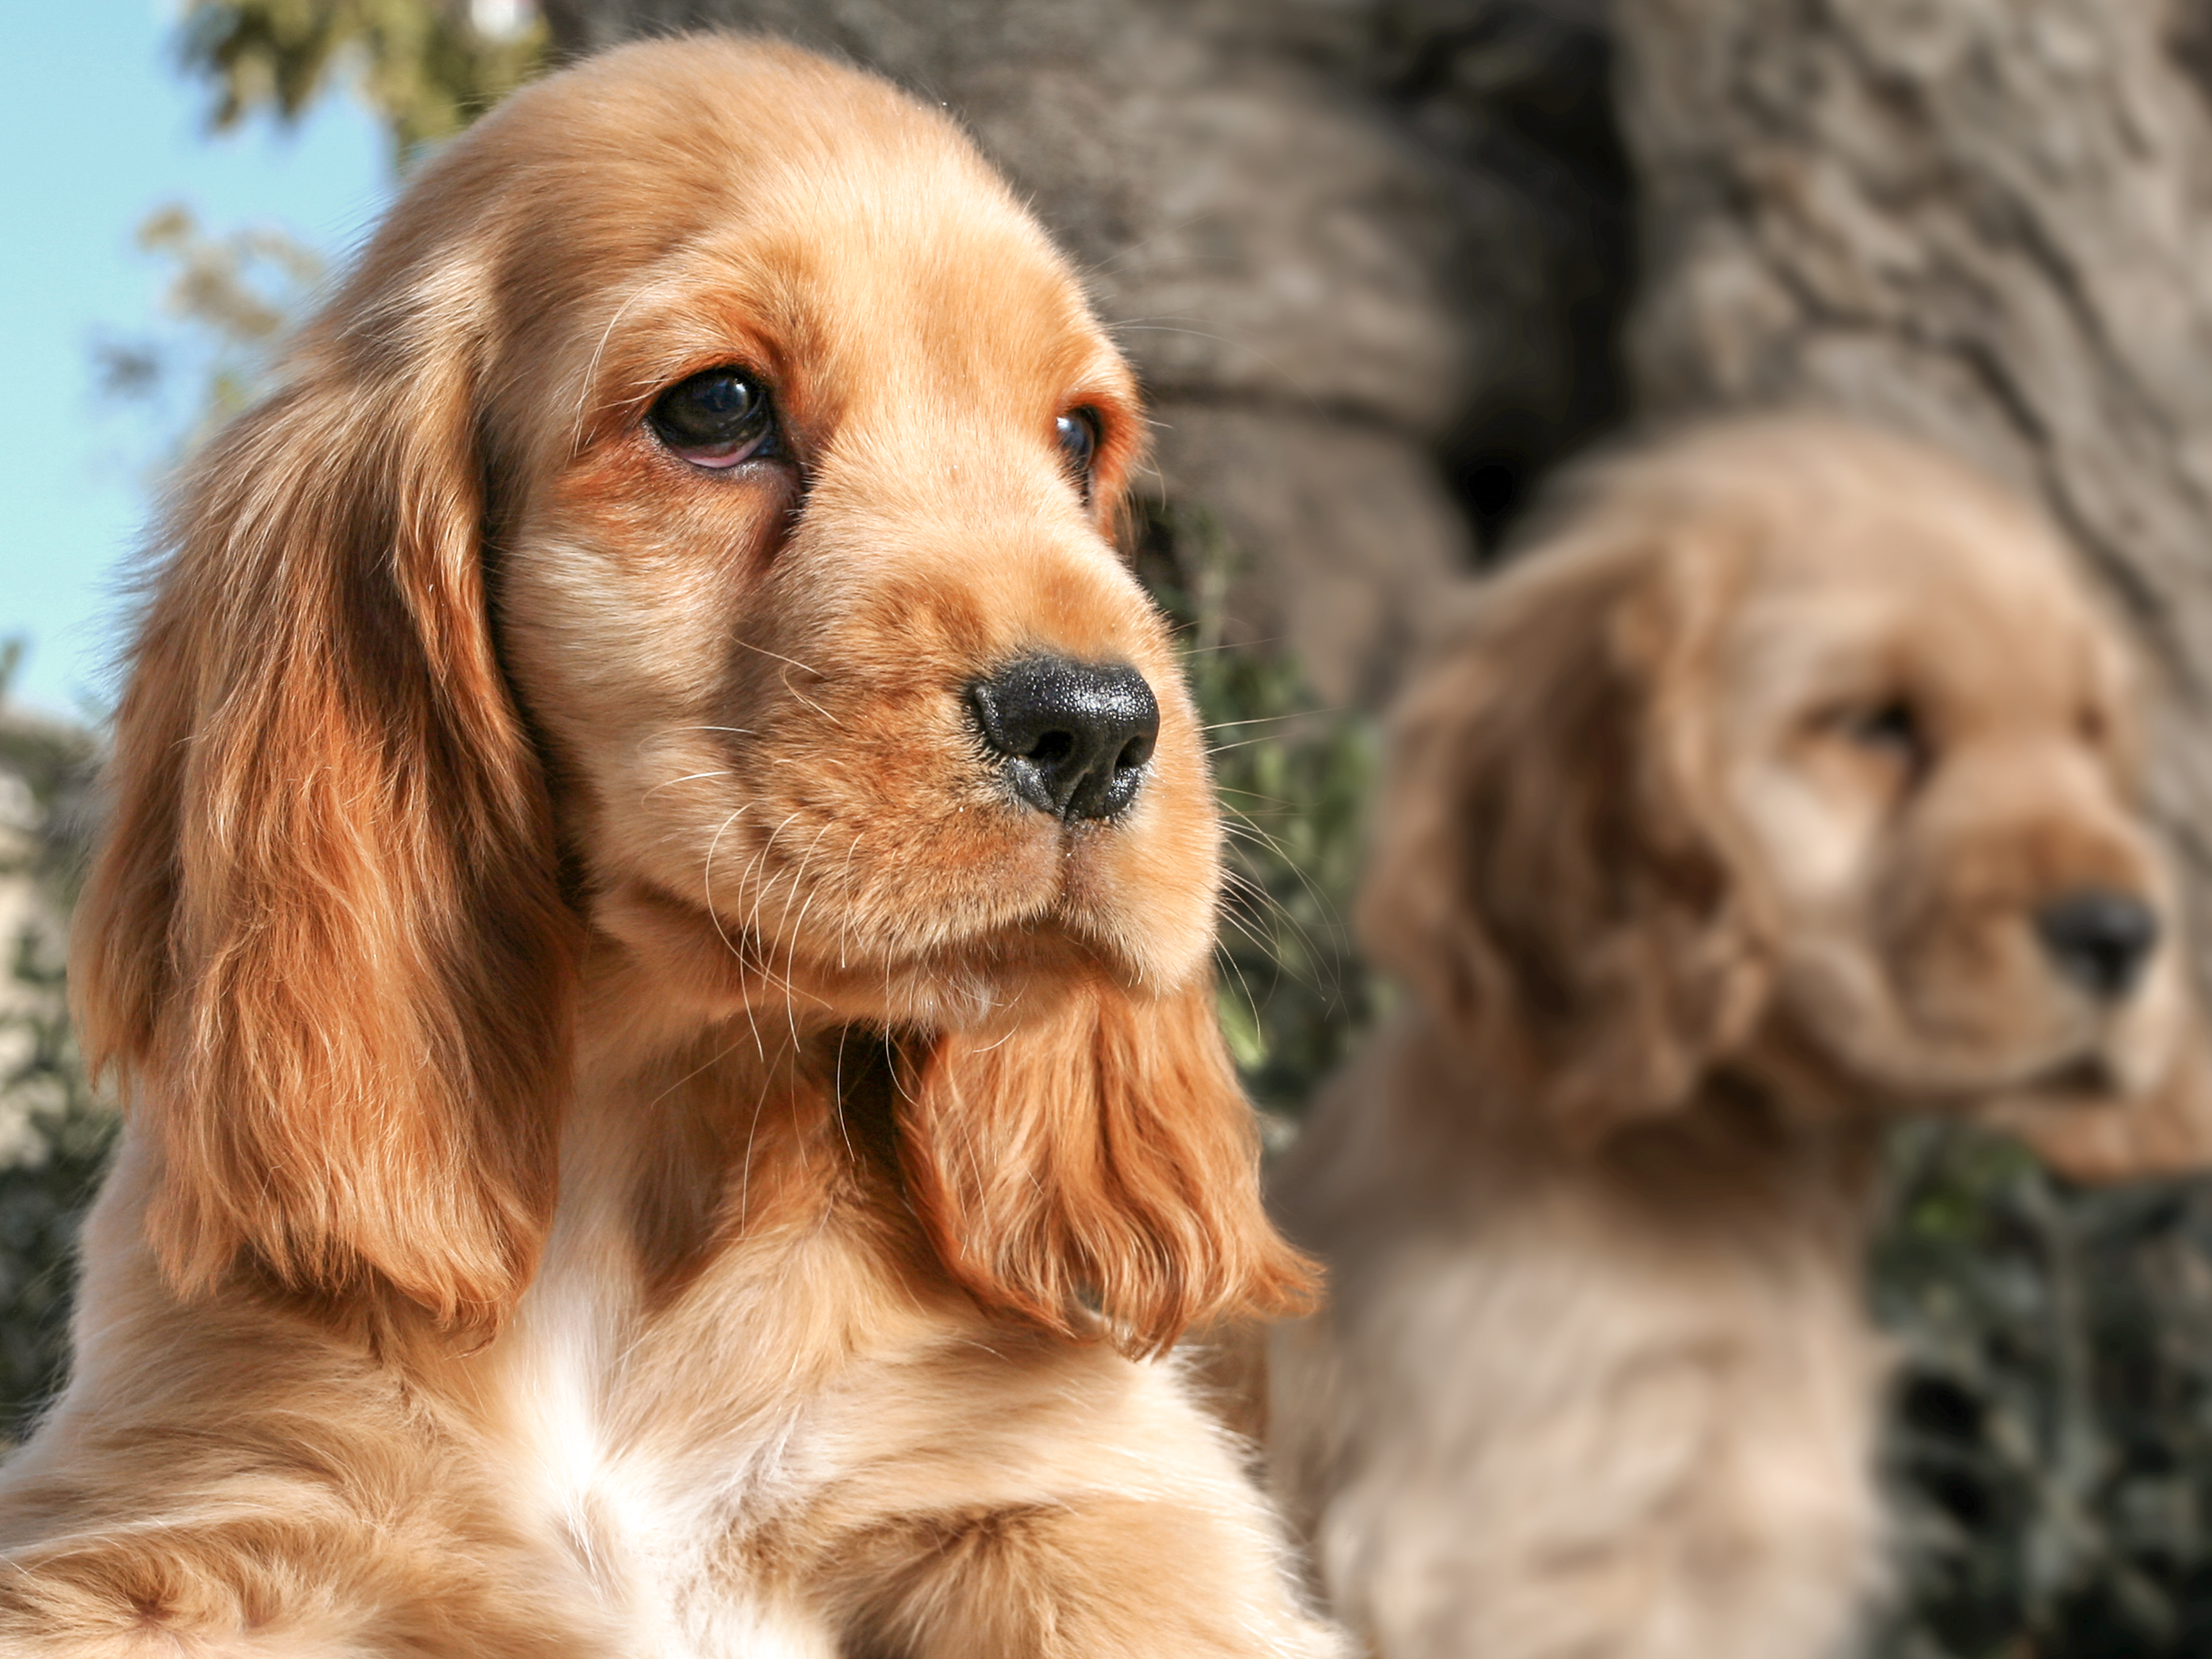 American Cocker Spaniel puppies standing outdoors next to a tree